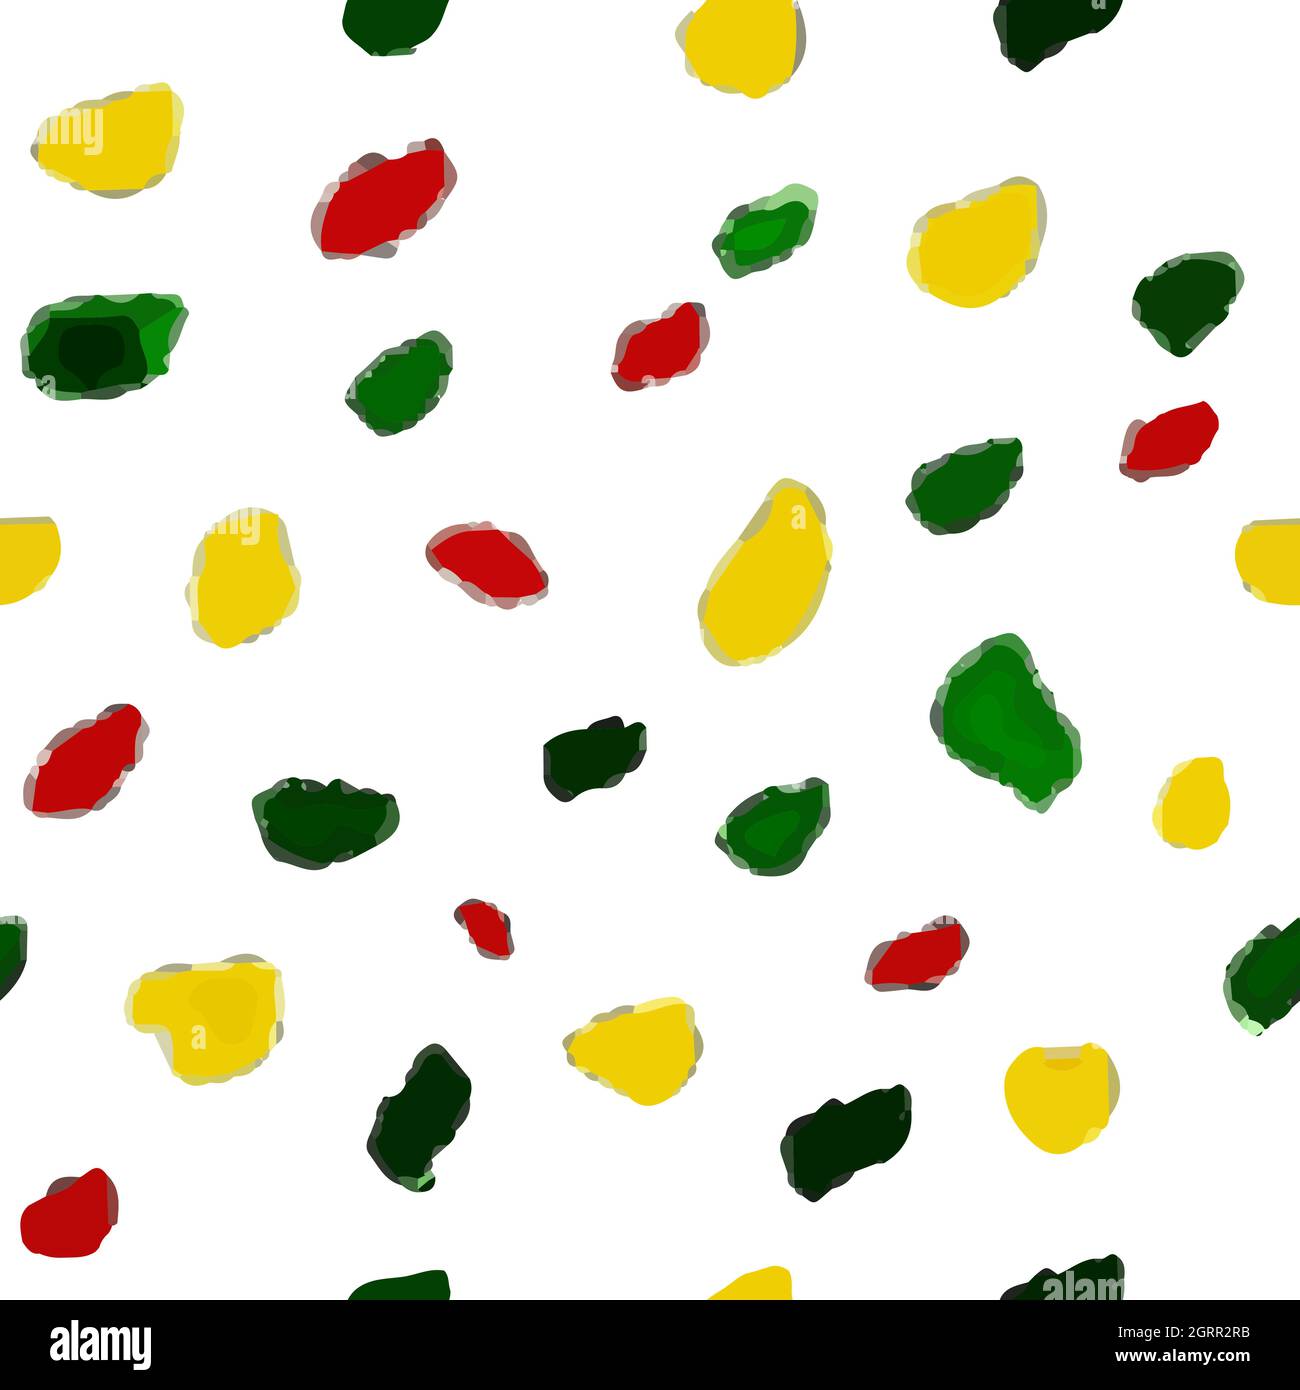 Background pattern of multicolored chaotic spots of paint. Stock Vector